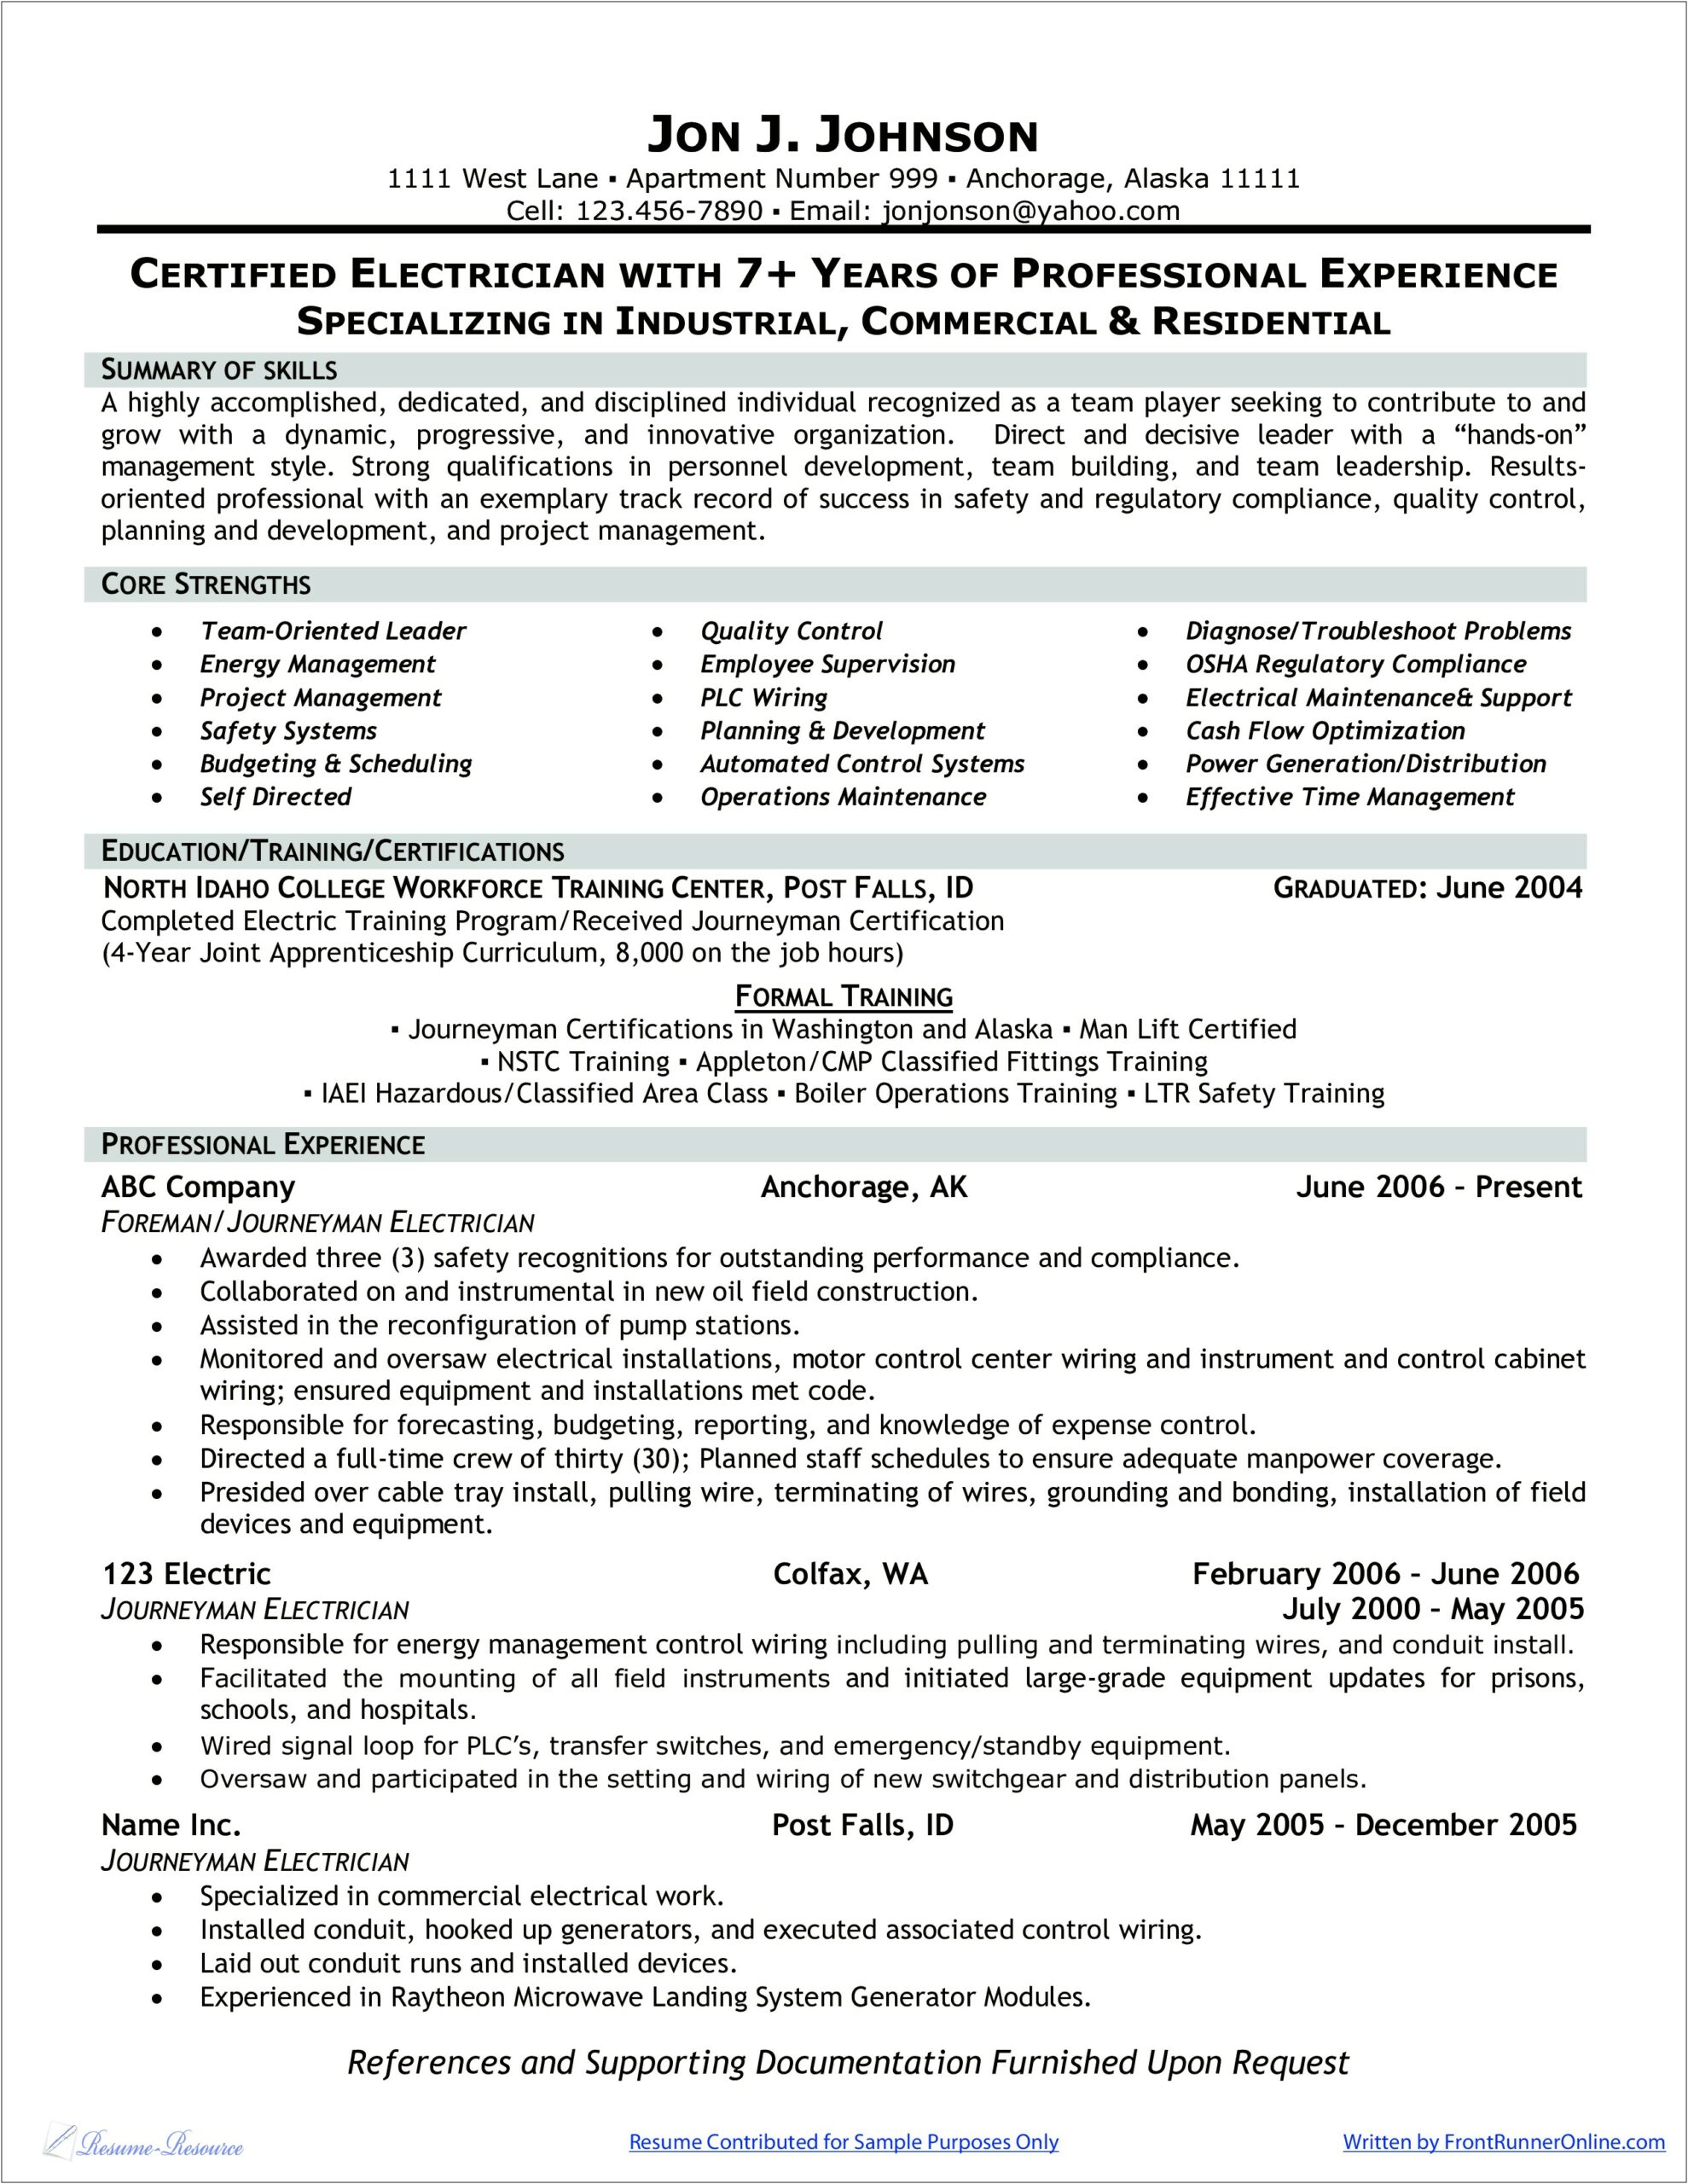 Resume Examples Apply Apprentice Electrician